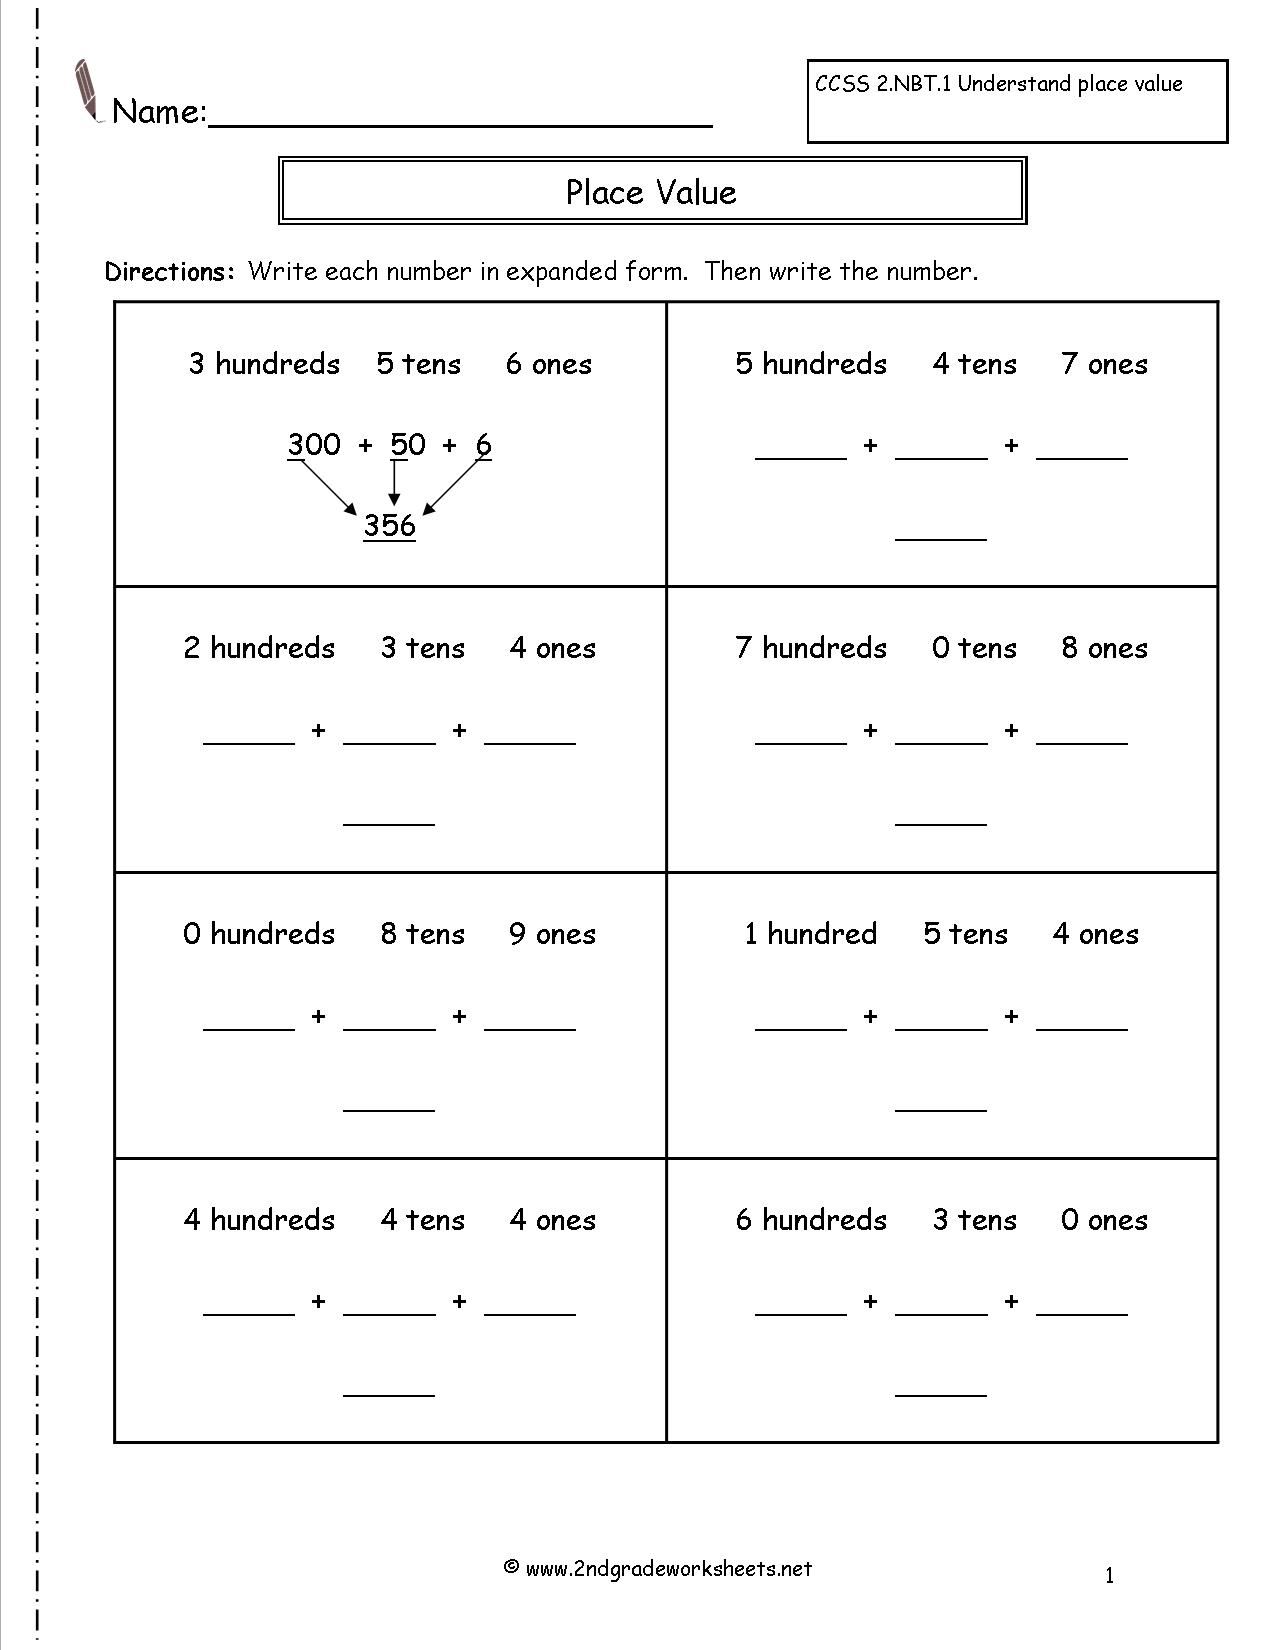 15-best-images-of-expanded-form-worksheets-write-numbers-in-expanded-form-worksheet-standard